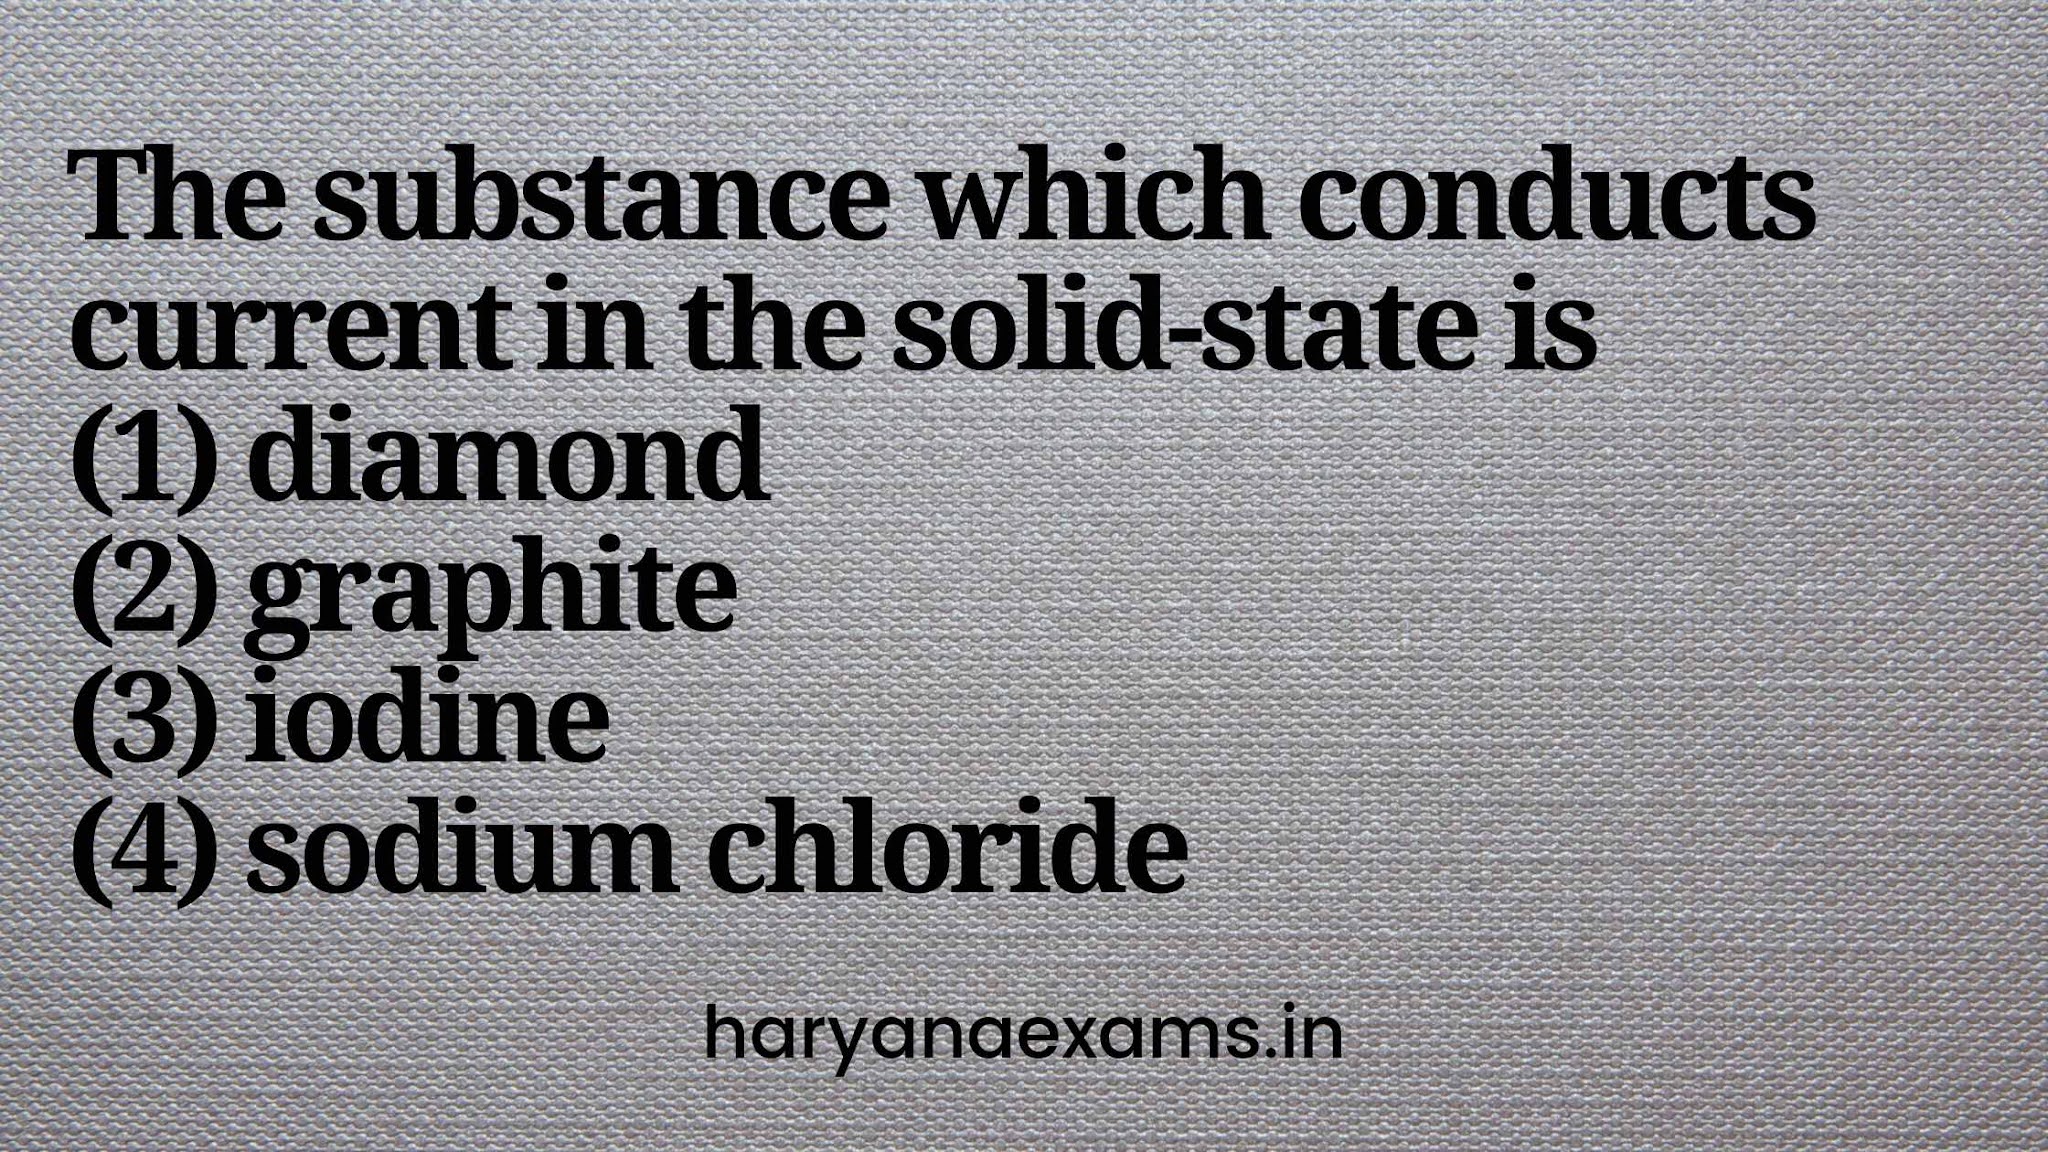 The substance which conducts current in the solid-state is   (1) diamond   (2) graphite   (3) iodine   (4) sodium chloride